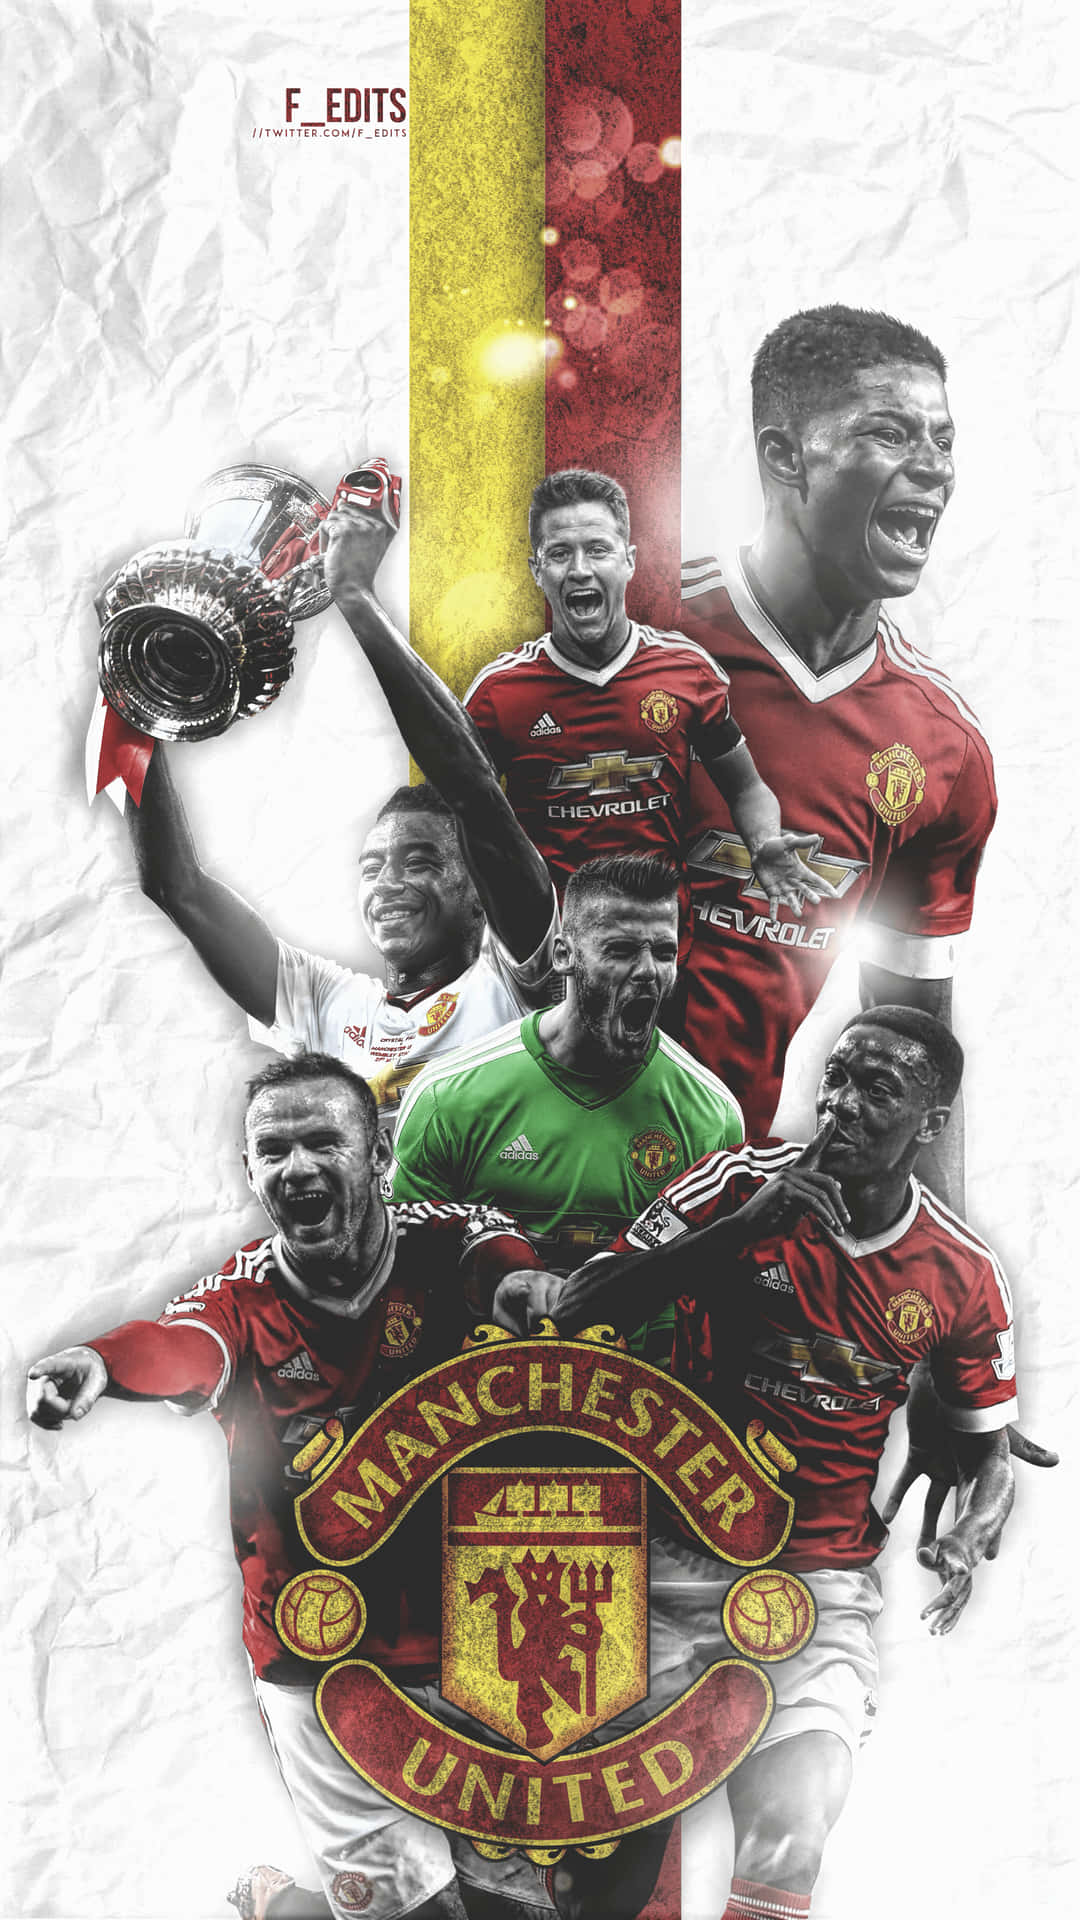 The gallant Manchester United team, poised for success. Wallpaper